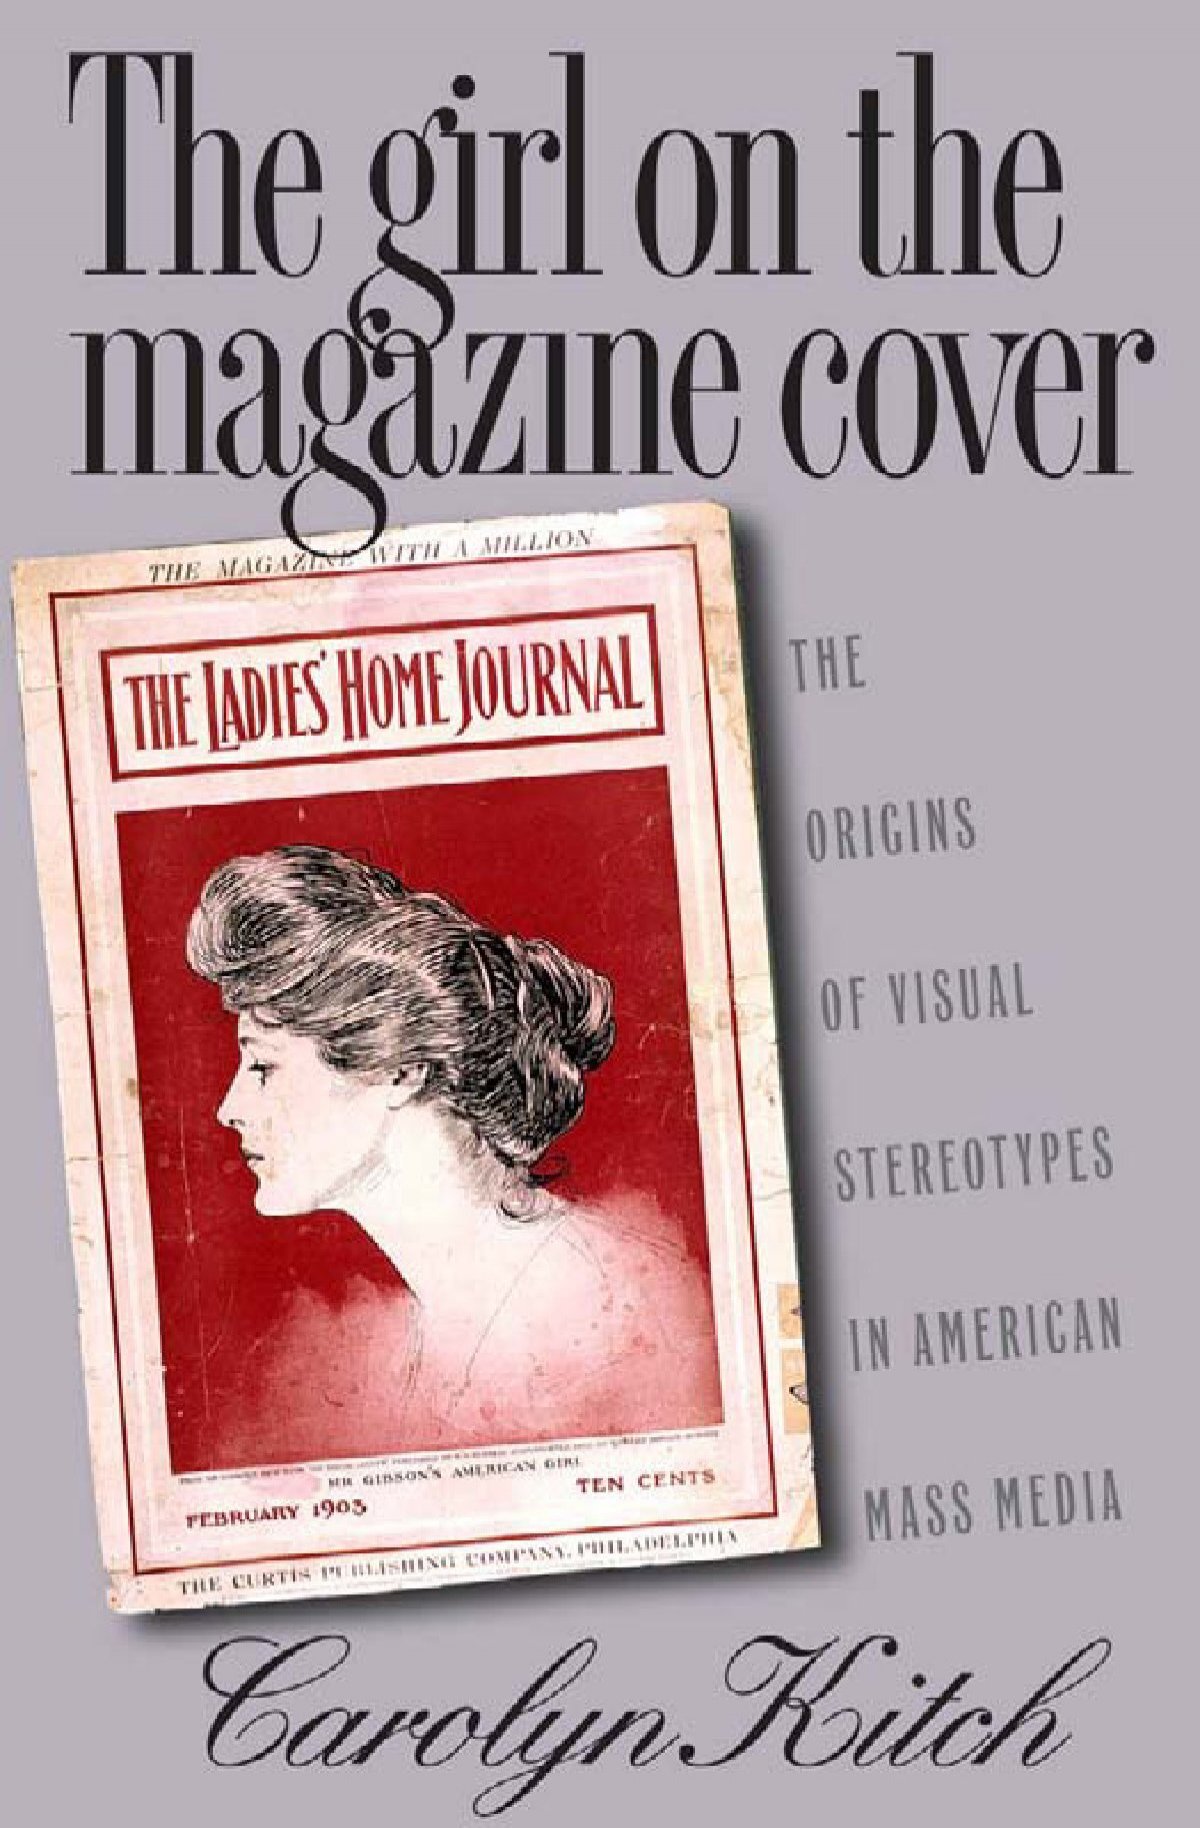 The Girl on the Magazine Cover: The Origins of Visual Stereotypes